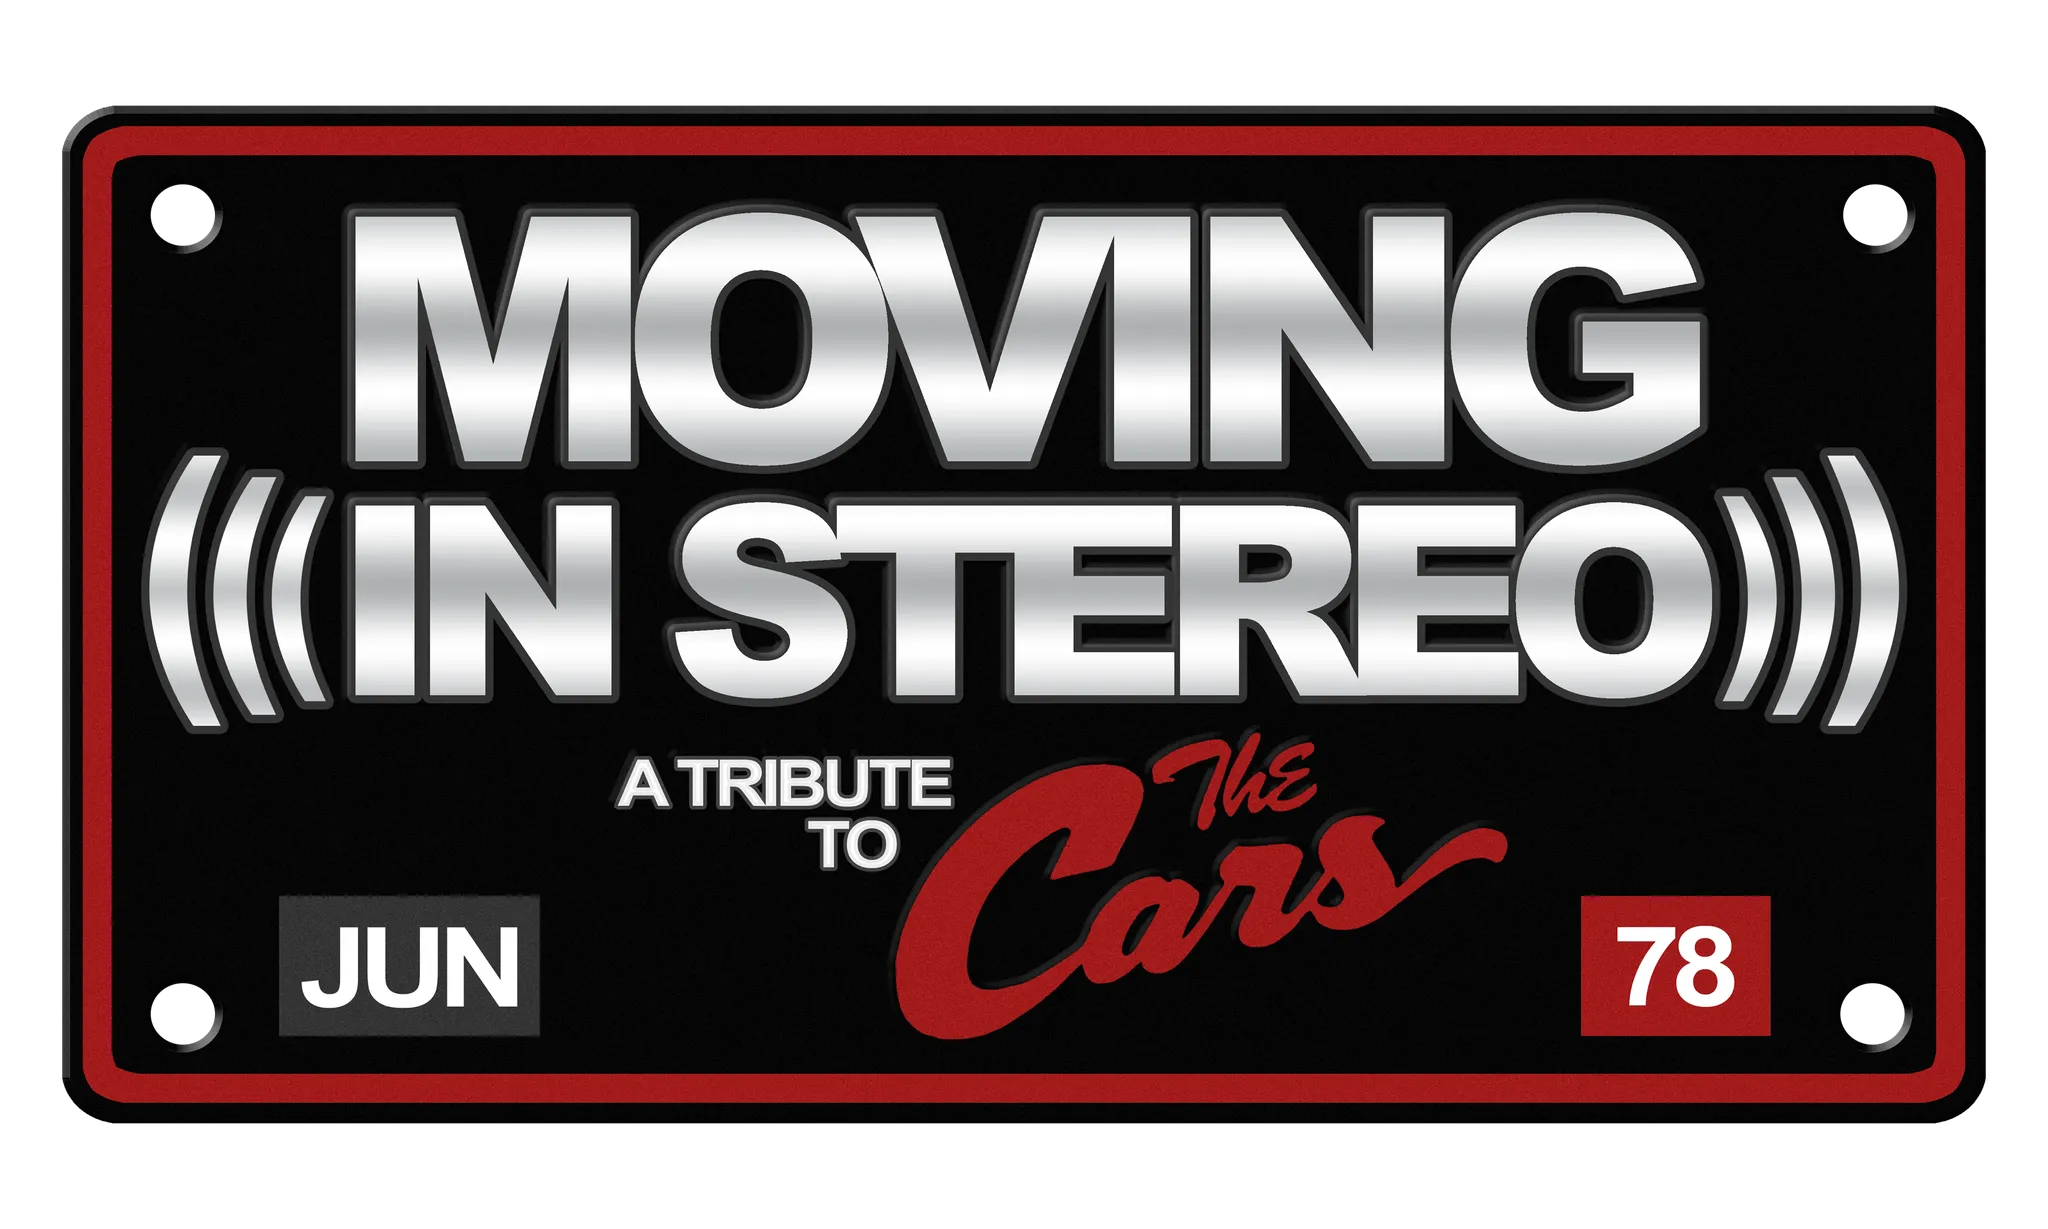 Moving in stereo™: A tribute to the cars